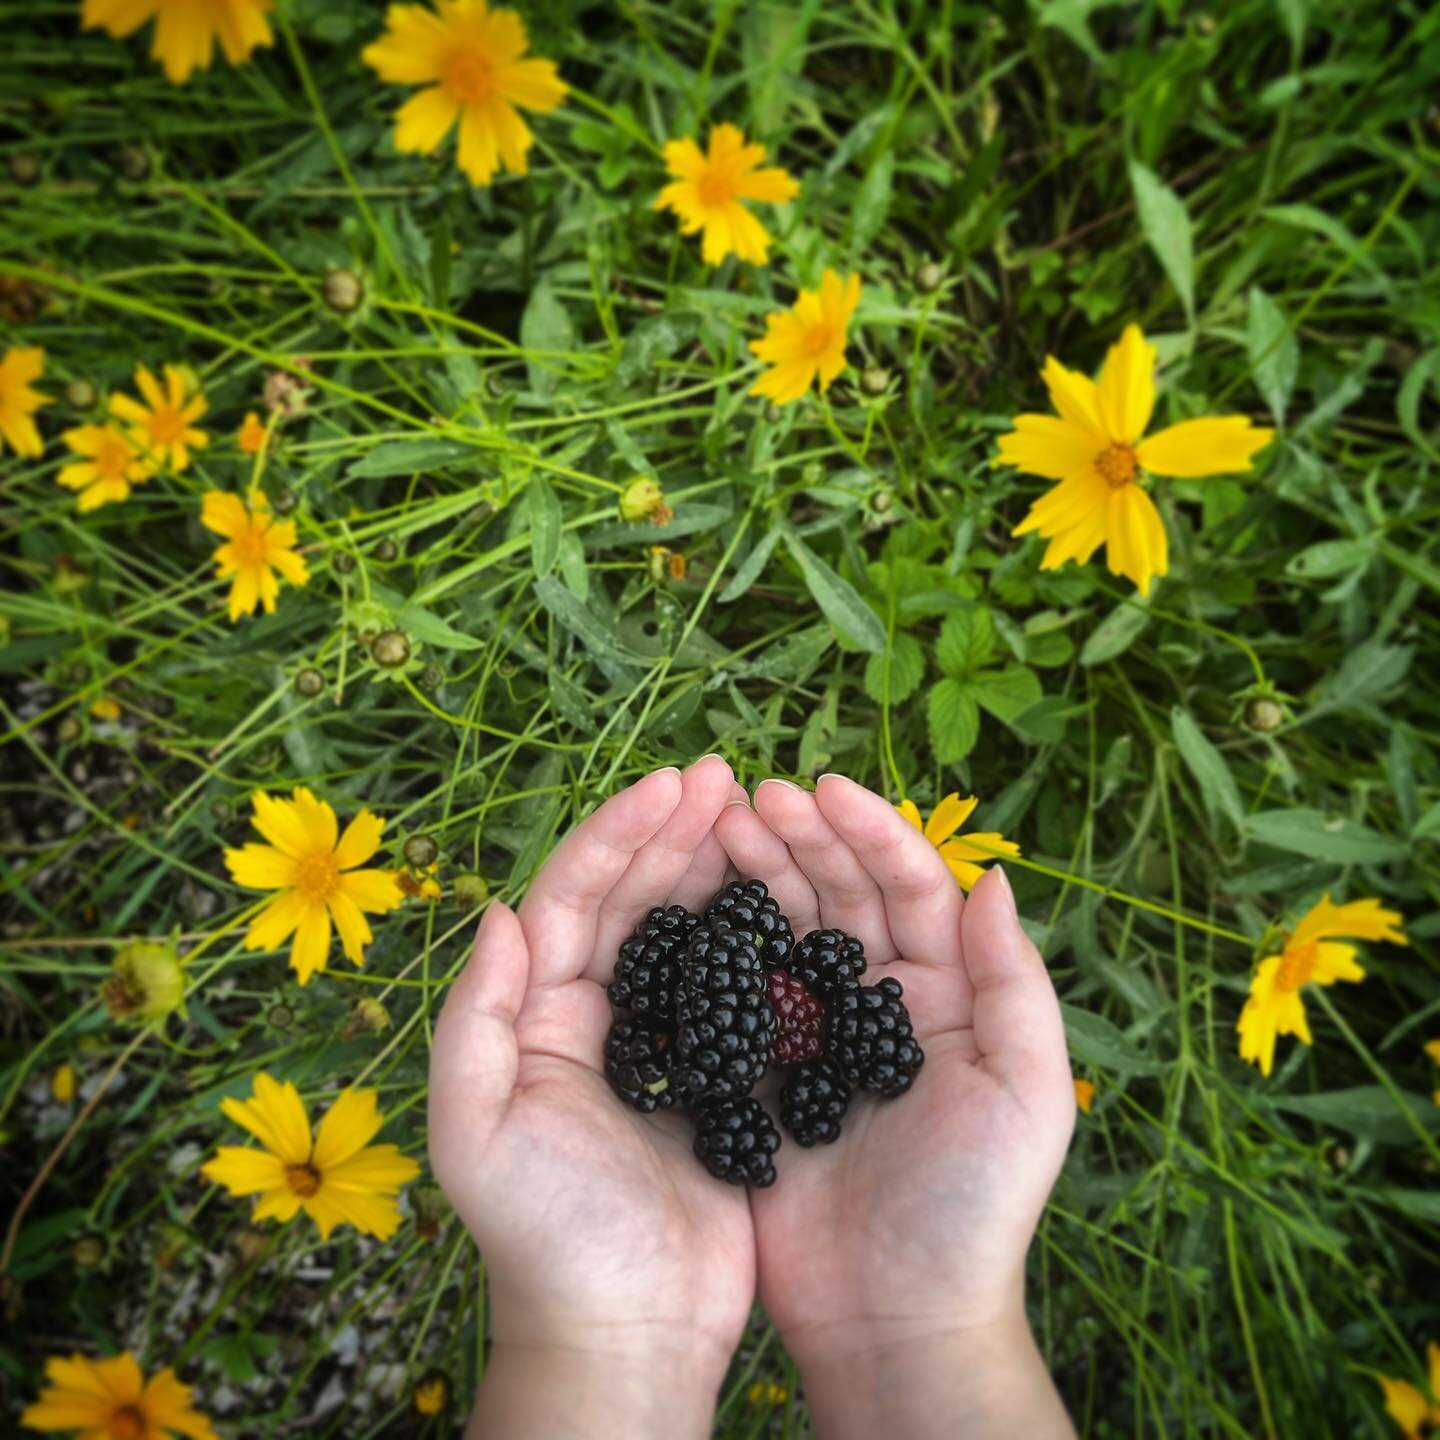 Blackberry season is here 😍 
Thank you bees 🐝🐝🐝